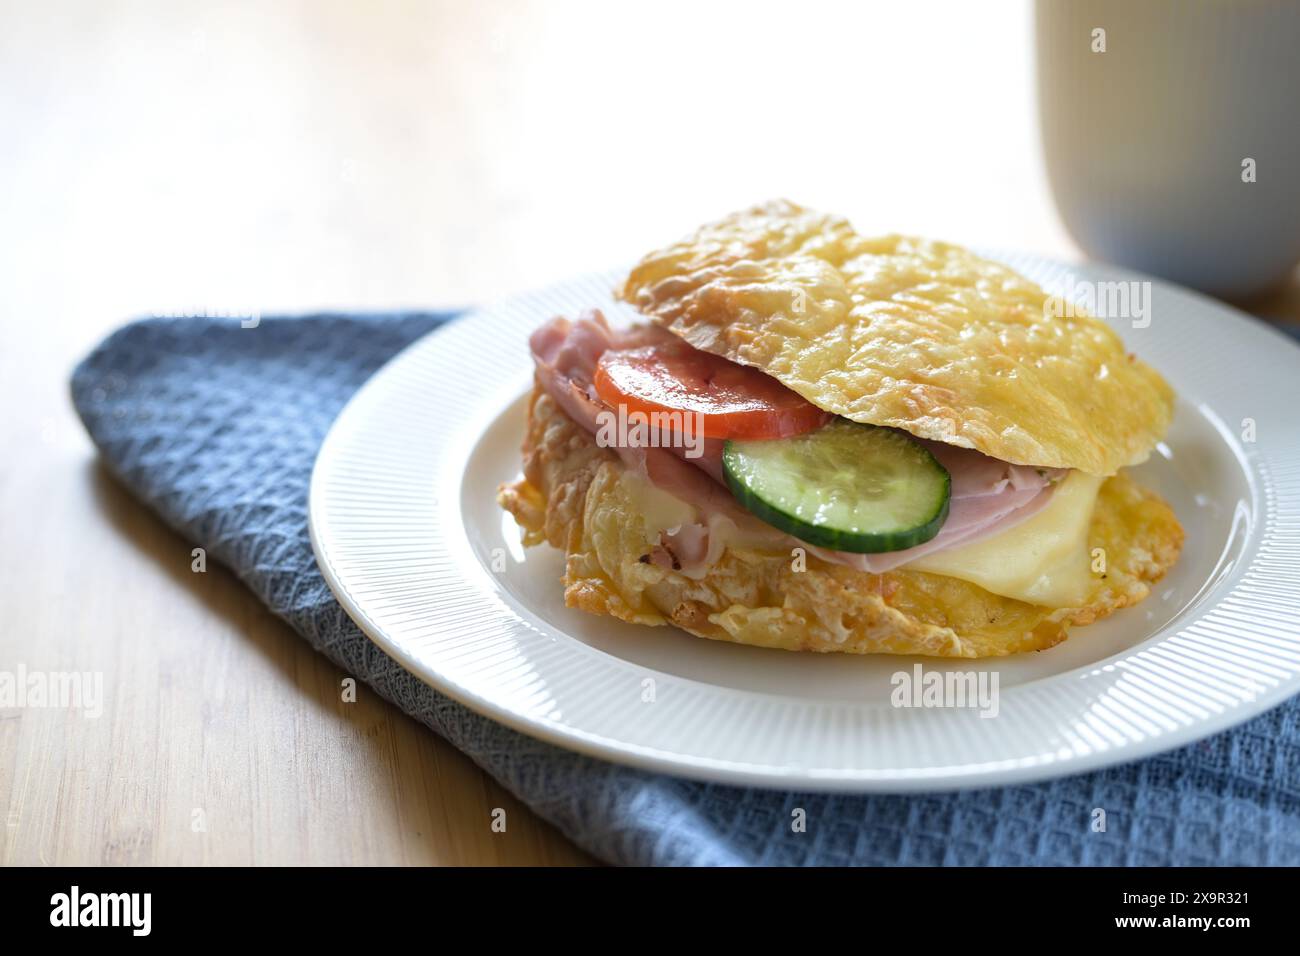 Cheese roll sandwich with boiled turkey, tomato and cucumber on a plate as a lunch snack, copy space, selected focus, narrow depth of field Stock Photo